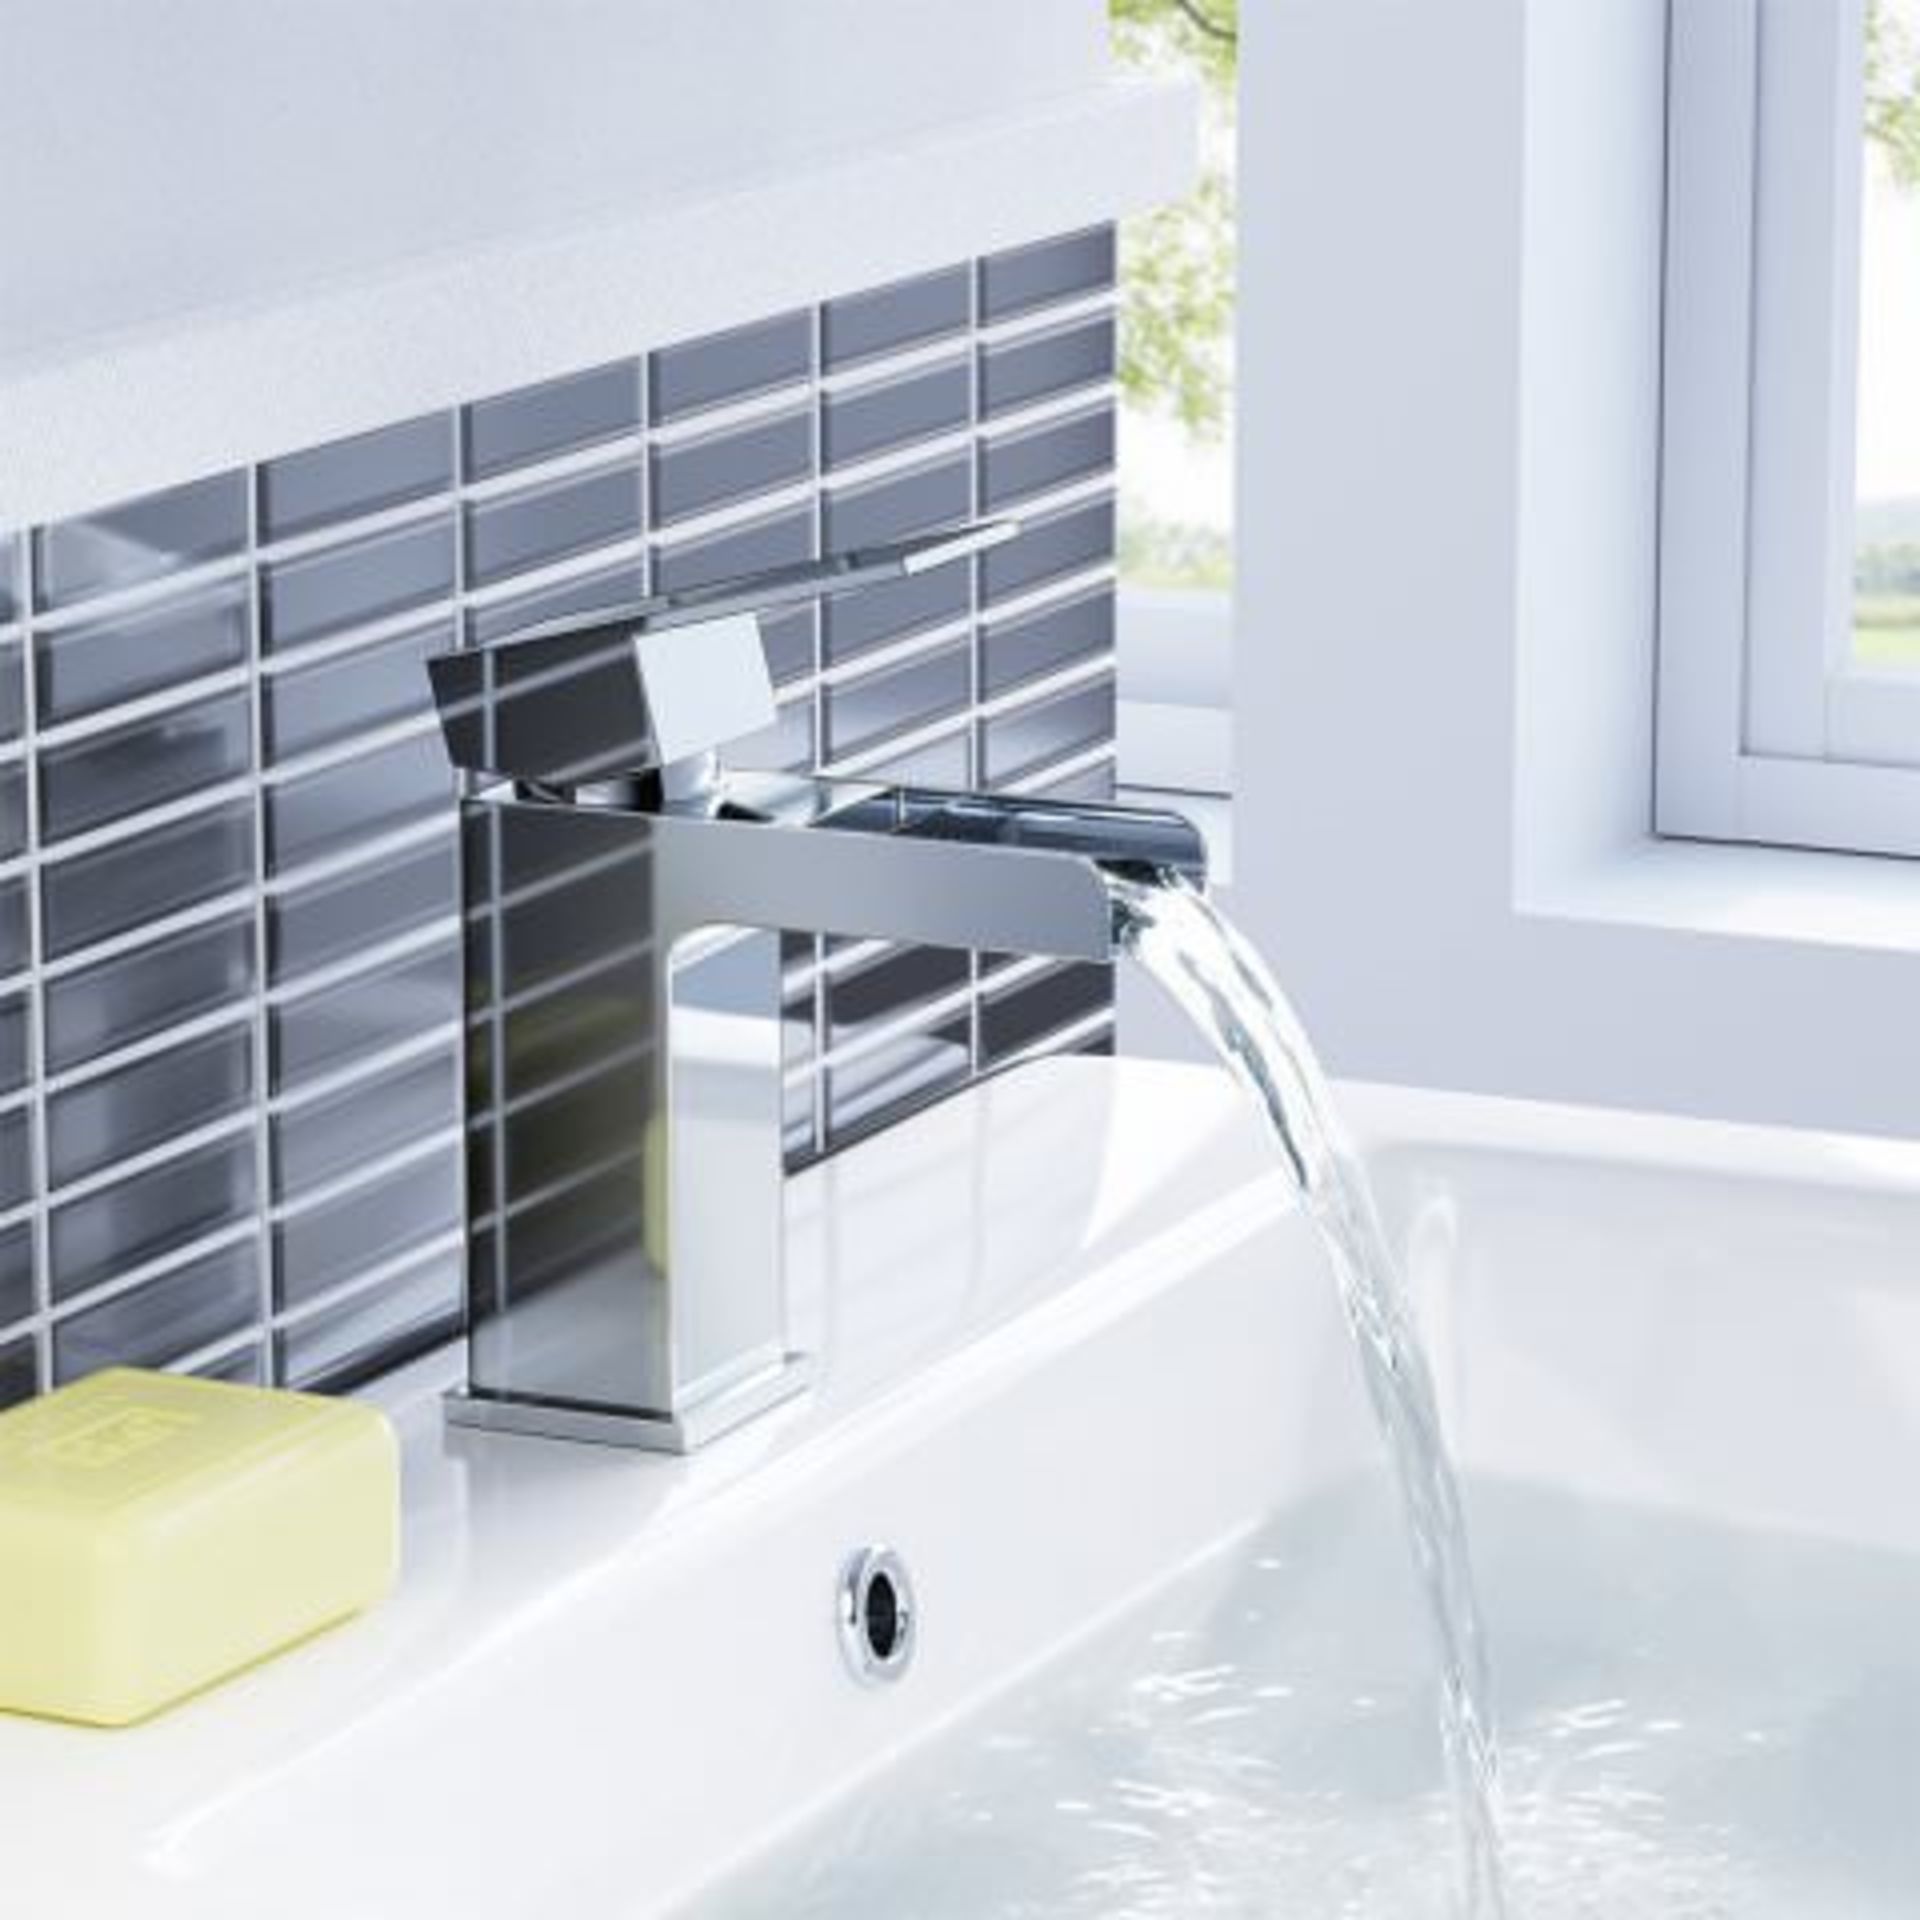 (A32) Niagra II Basin Mixer Tap Waterfall Feature Our range of waterfall taps add a contemporary - Image 3 of 3